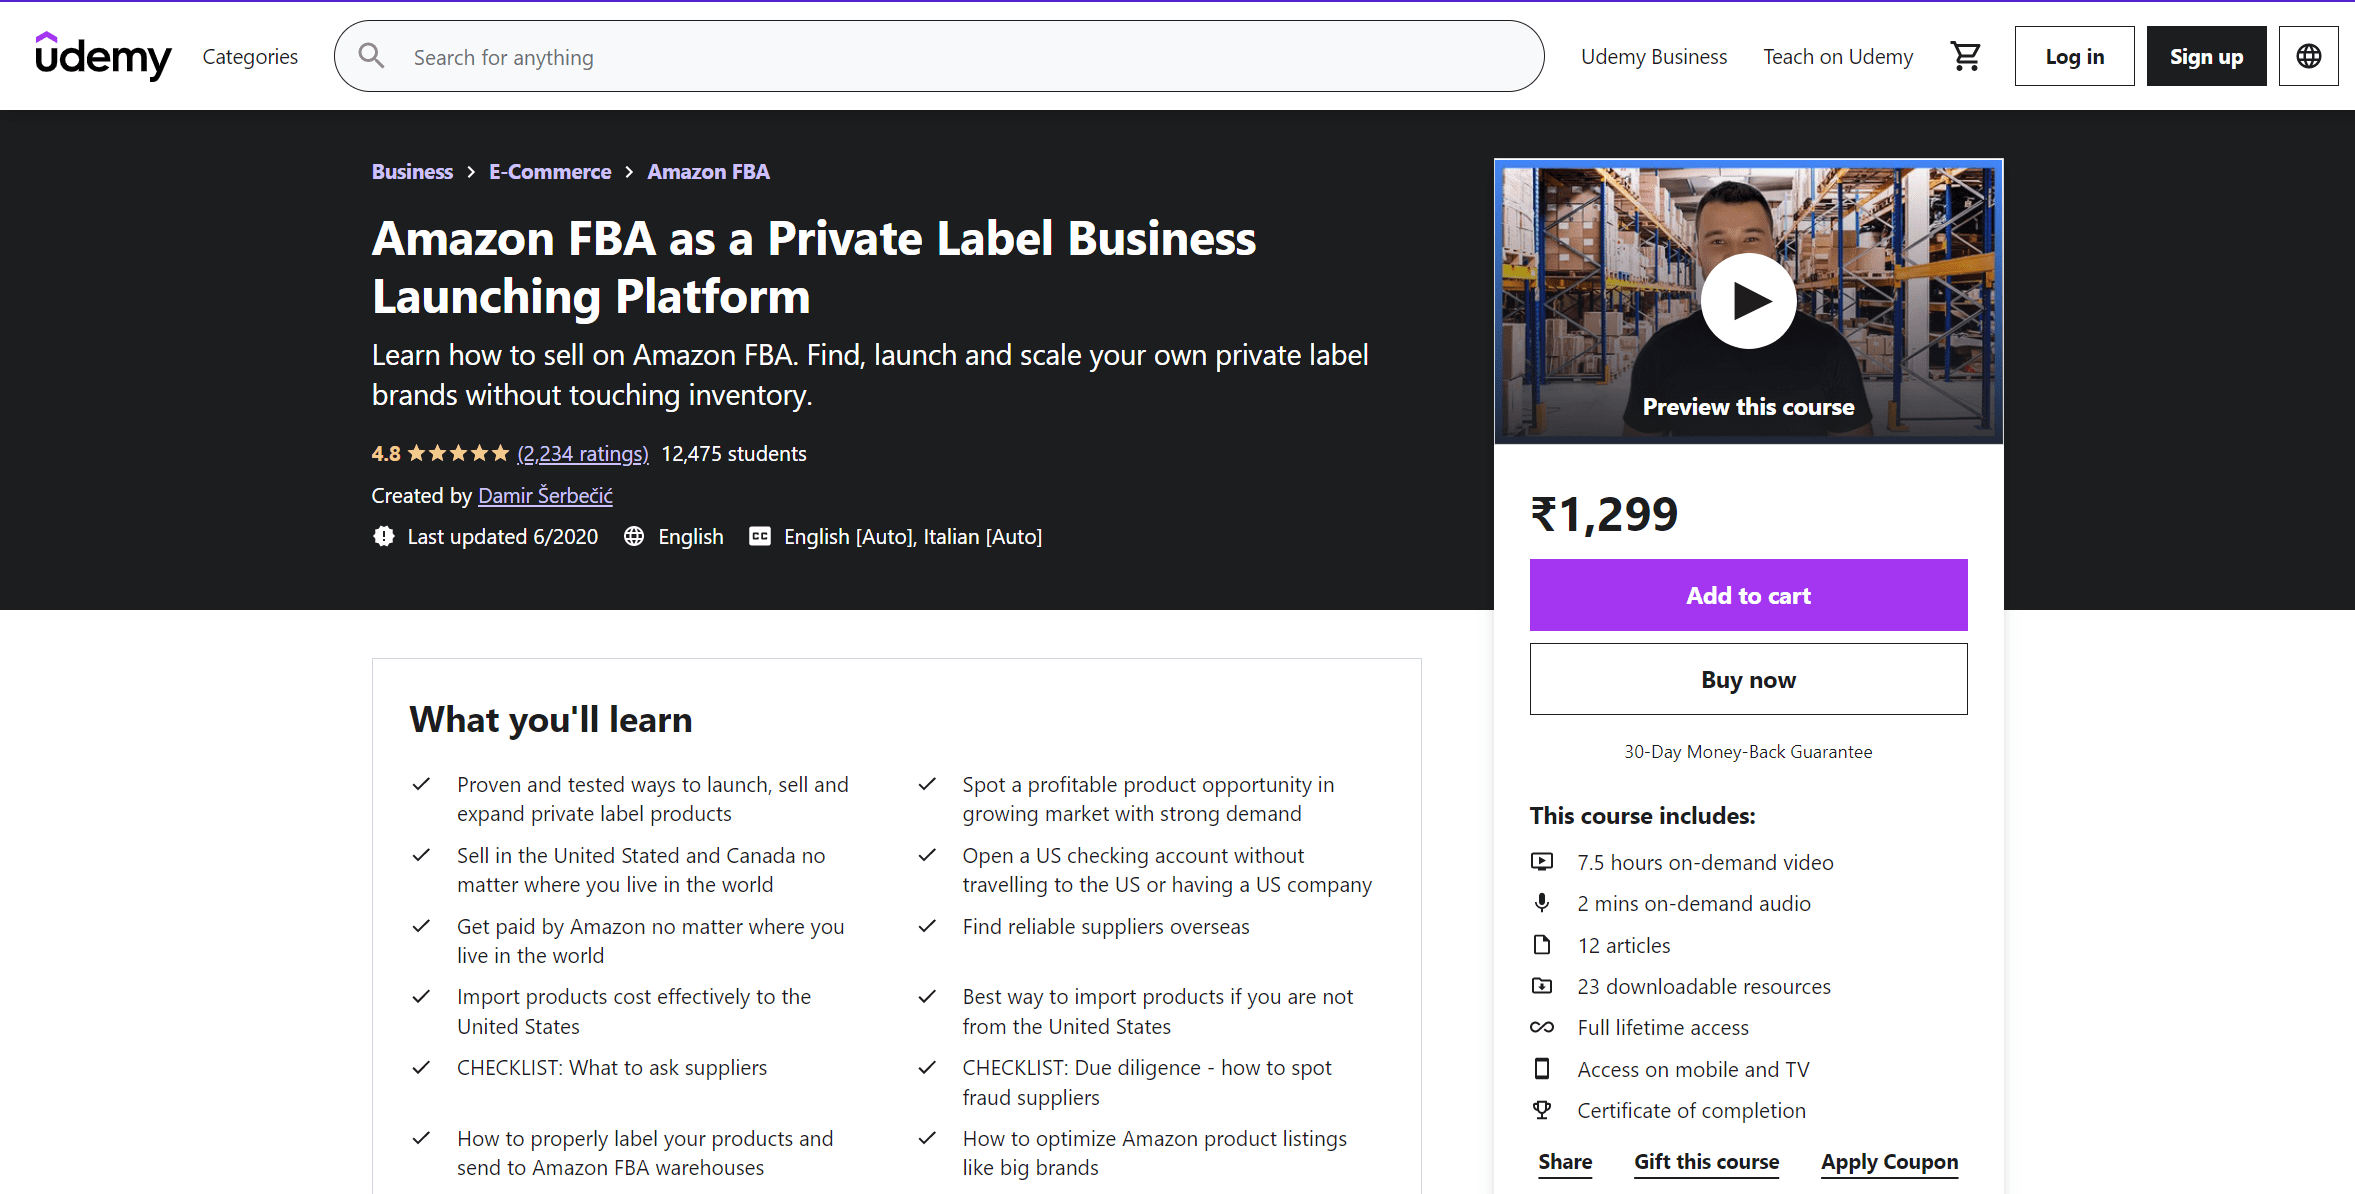 Amazon FBA as a Private Label Business Launching Platform